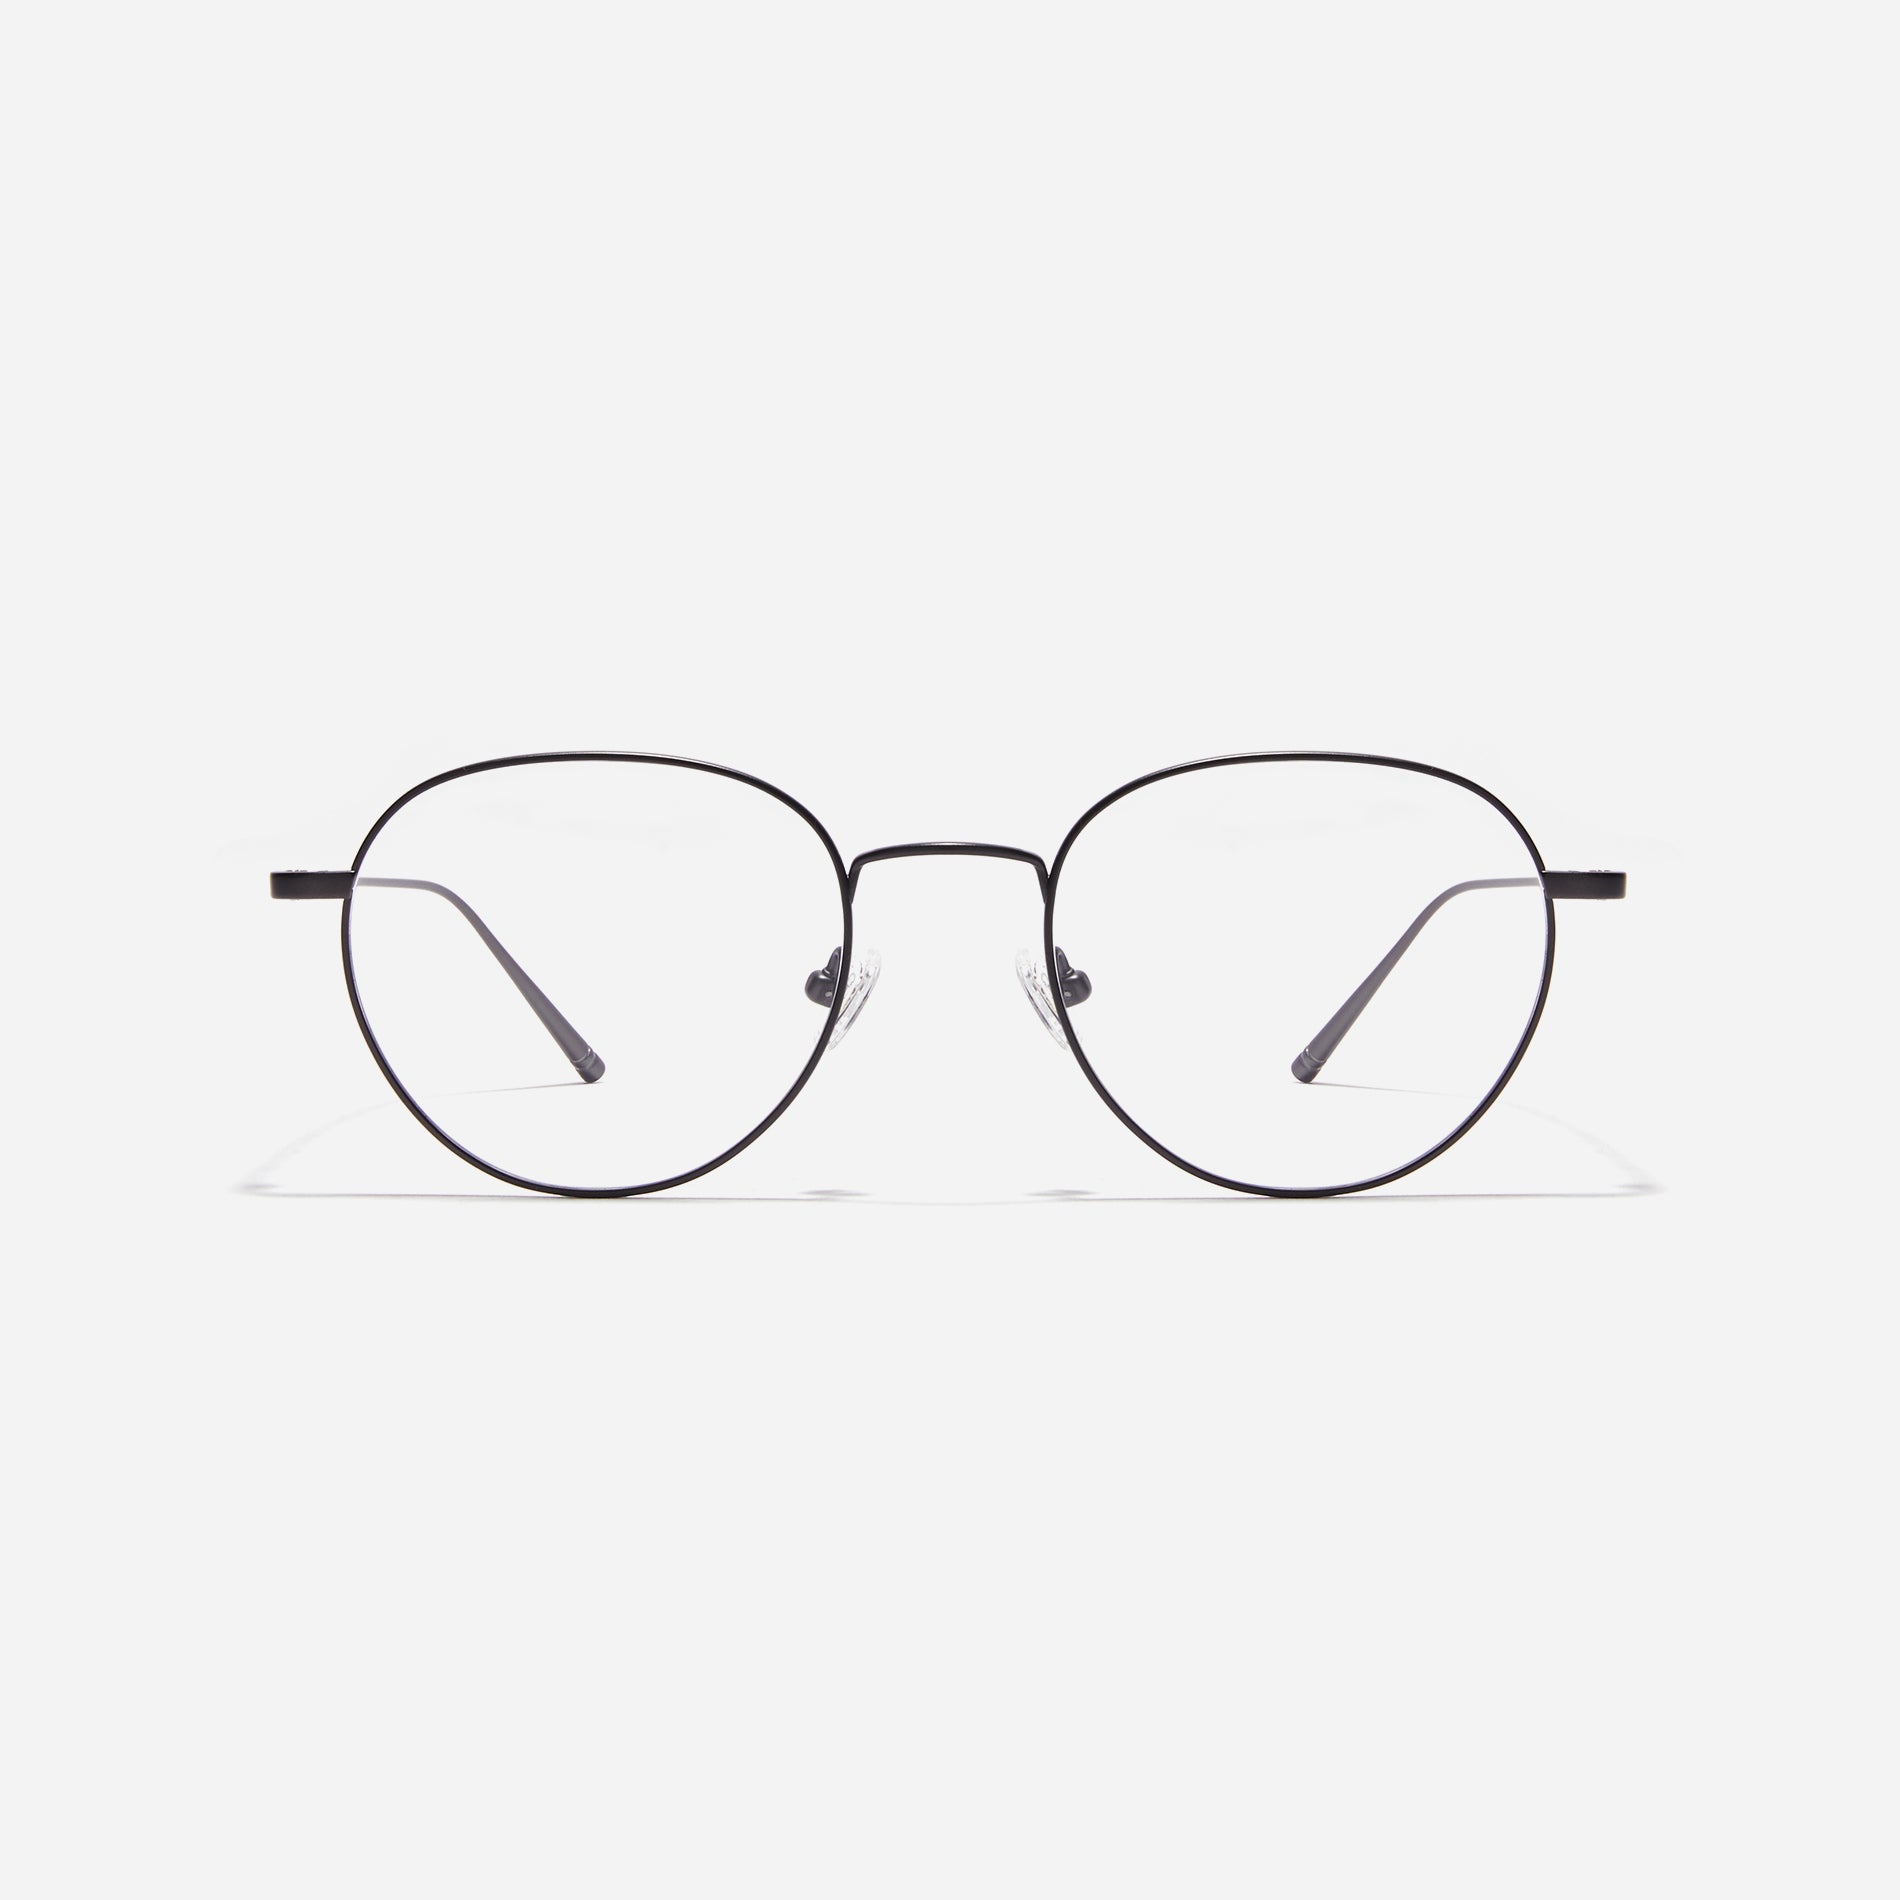 Polygon-shaped eyeglasses designed to effortlessly complement all face shapes. Crafted entirely from titanium, they ensure a remarkably light and durable wearing experience. Lika's casual design adds a fashionable touch to your daily look.